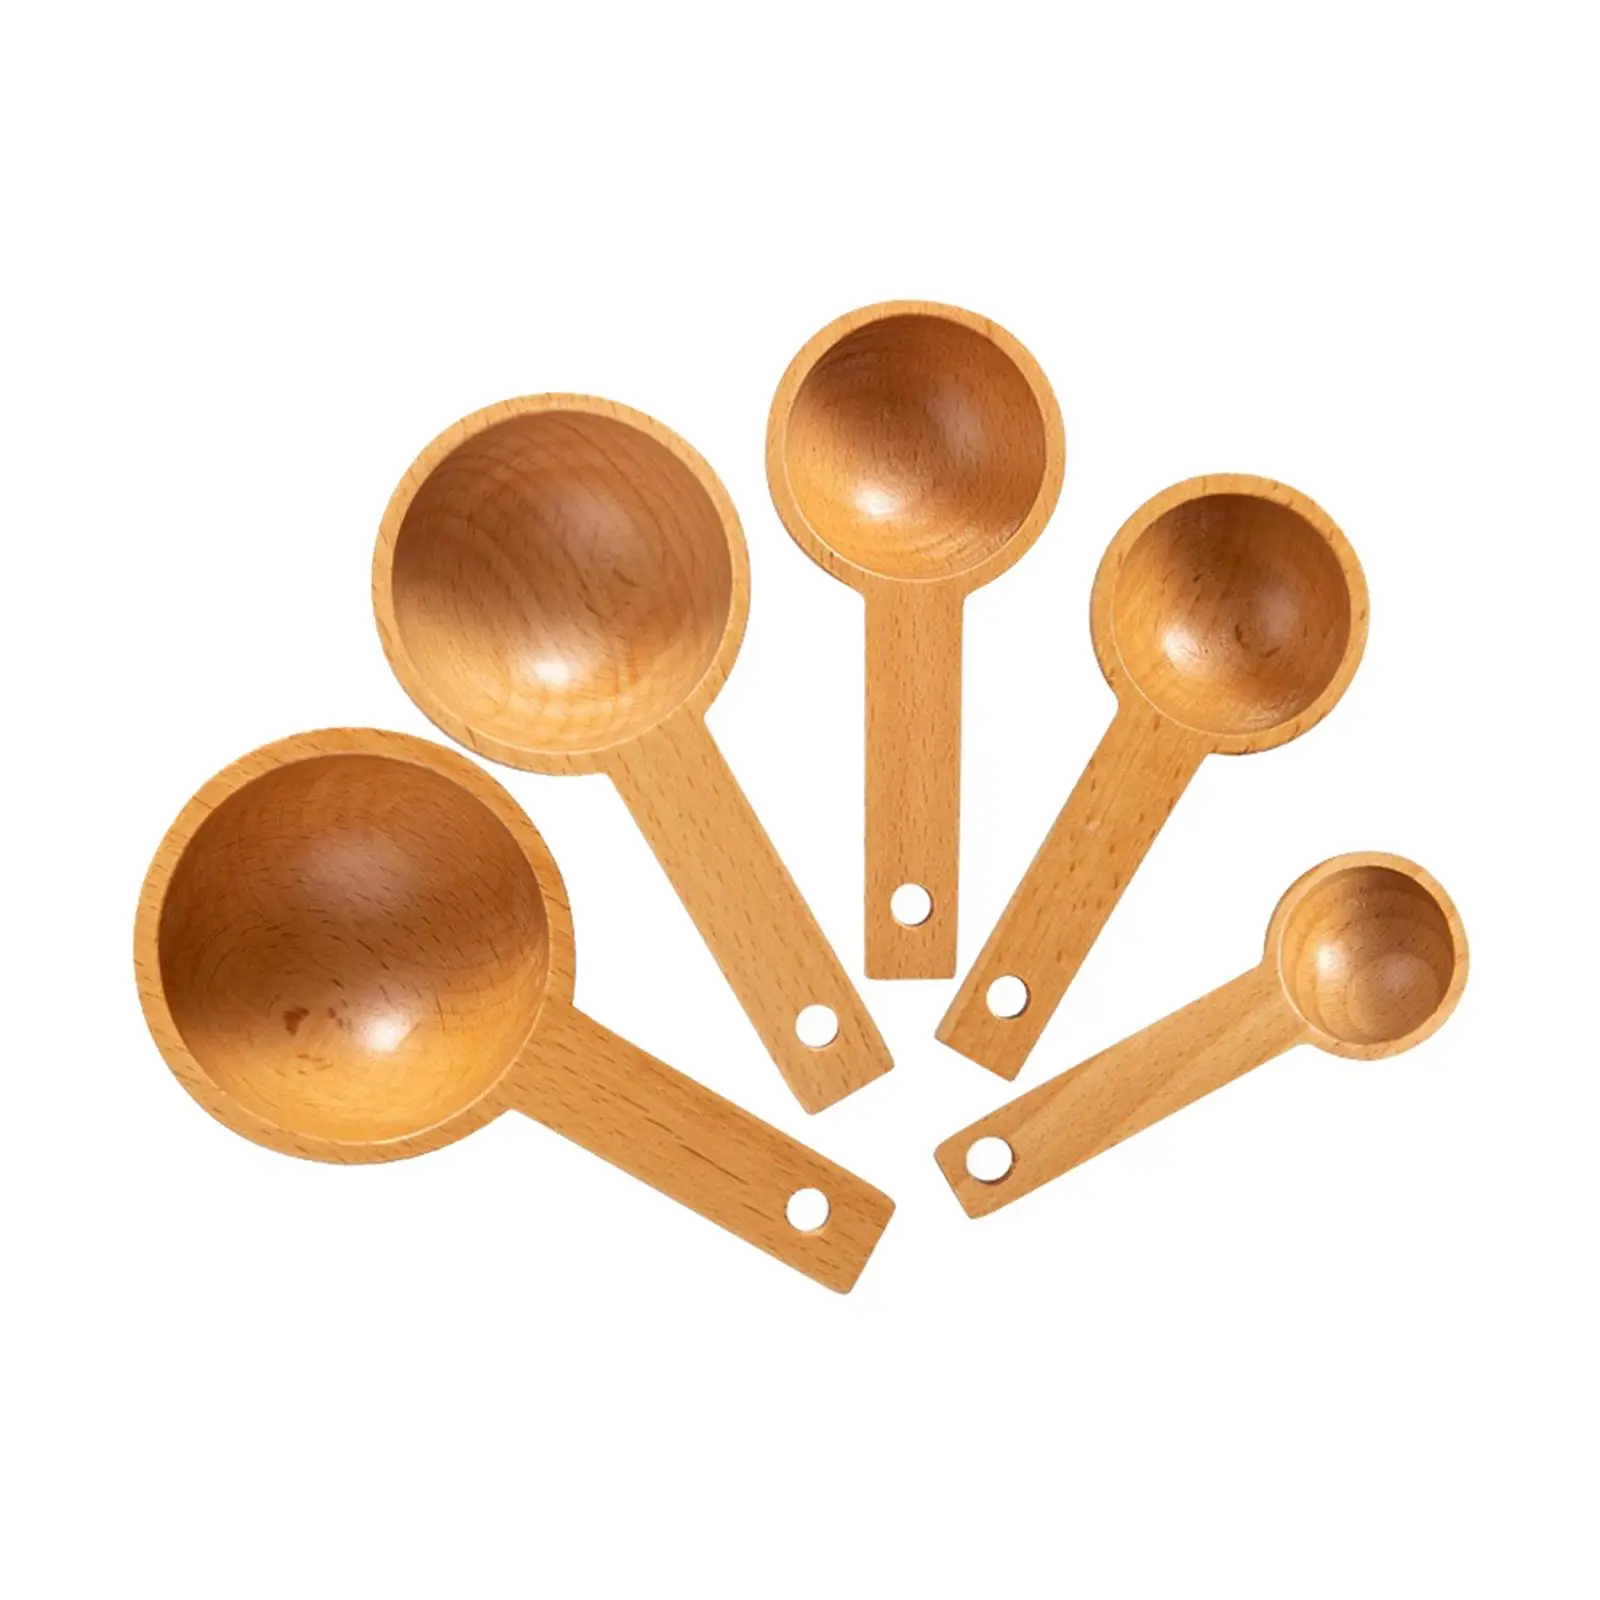 5 Pieces Wooden Measuring Spoons Multi-Functional Gadgets Accessories Teaspoon Flour Scoop Soup Spoons for Kitchen Baking Dining